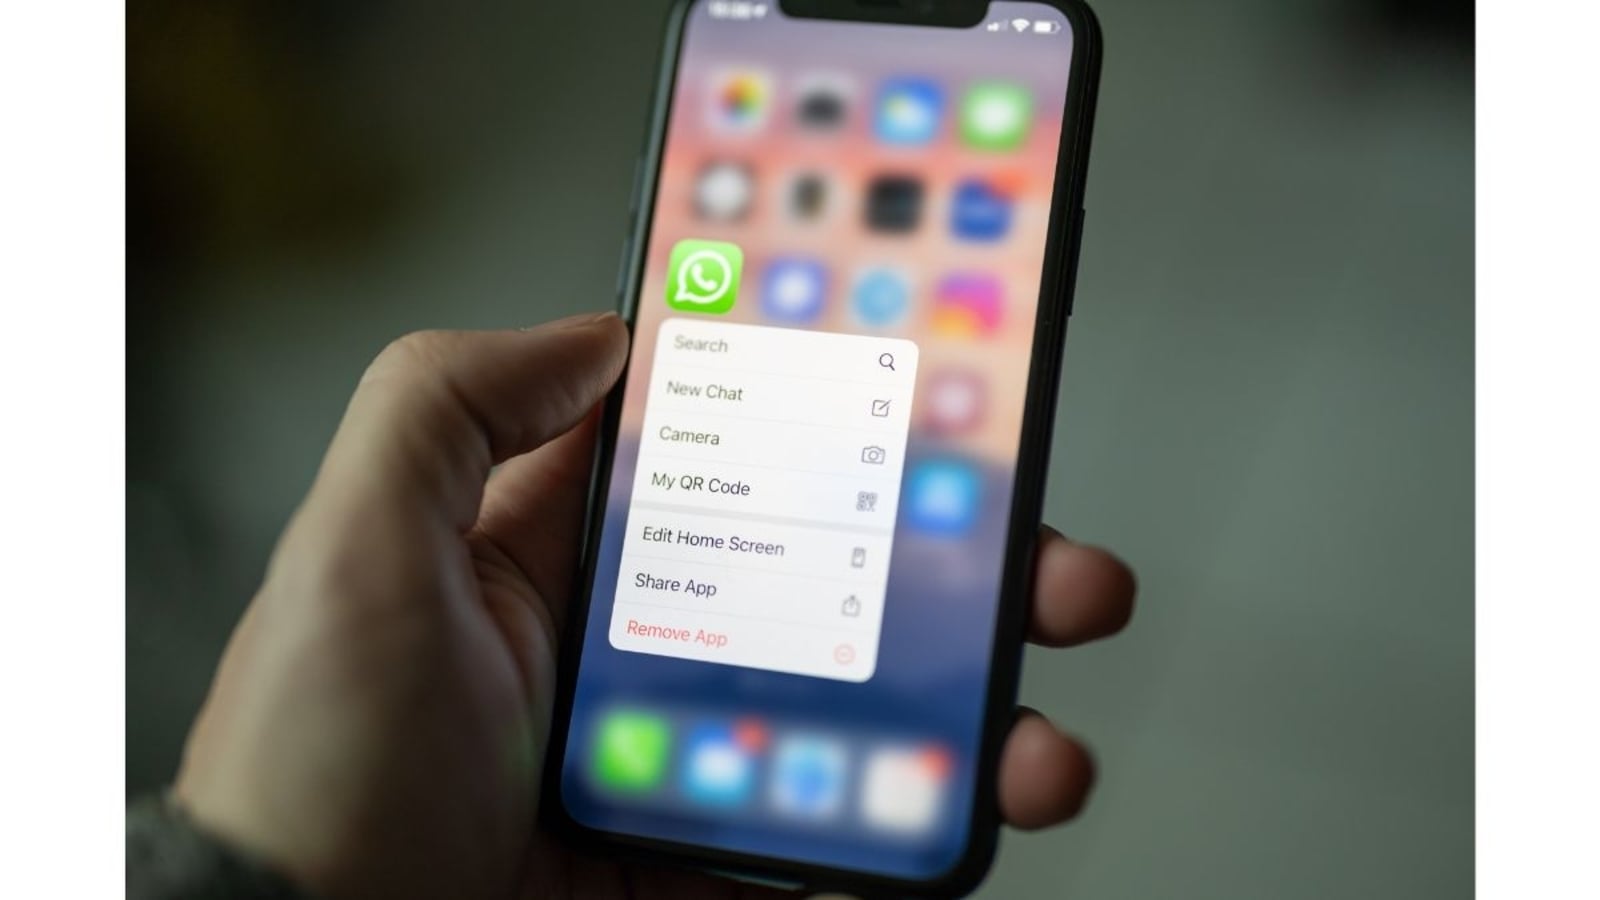 Iphone shoppers get a brand new WhatsApp update- Right here’s what’s new and all options outlined